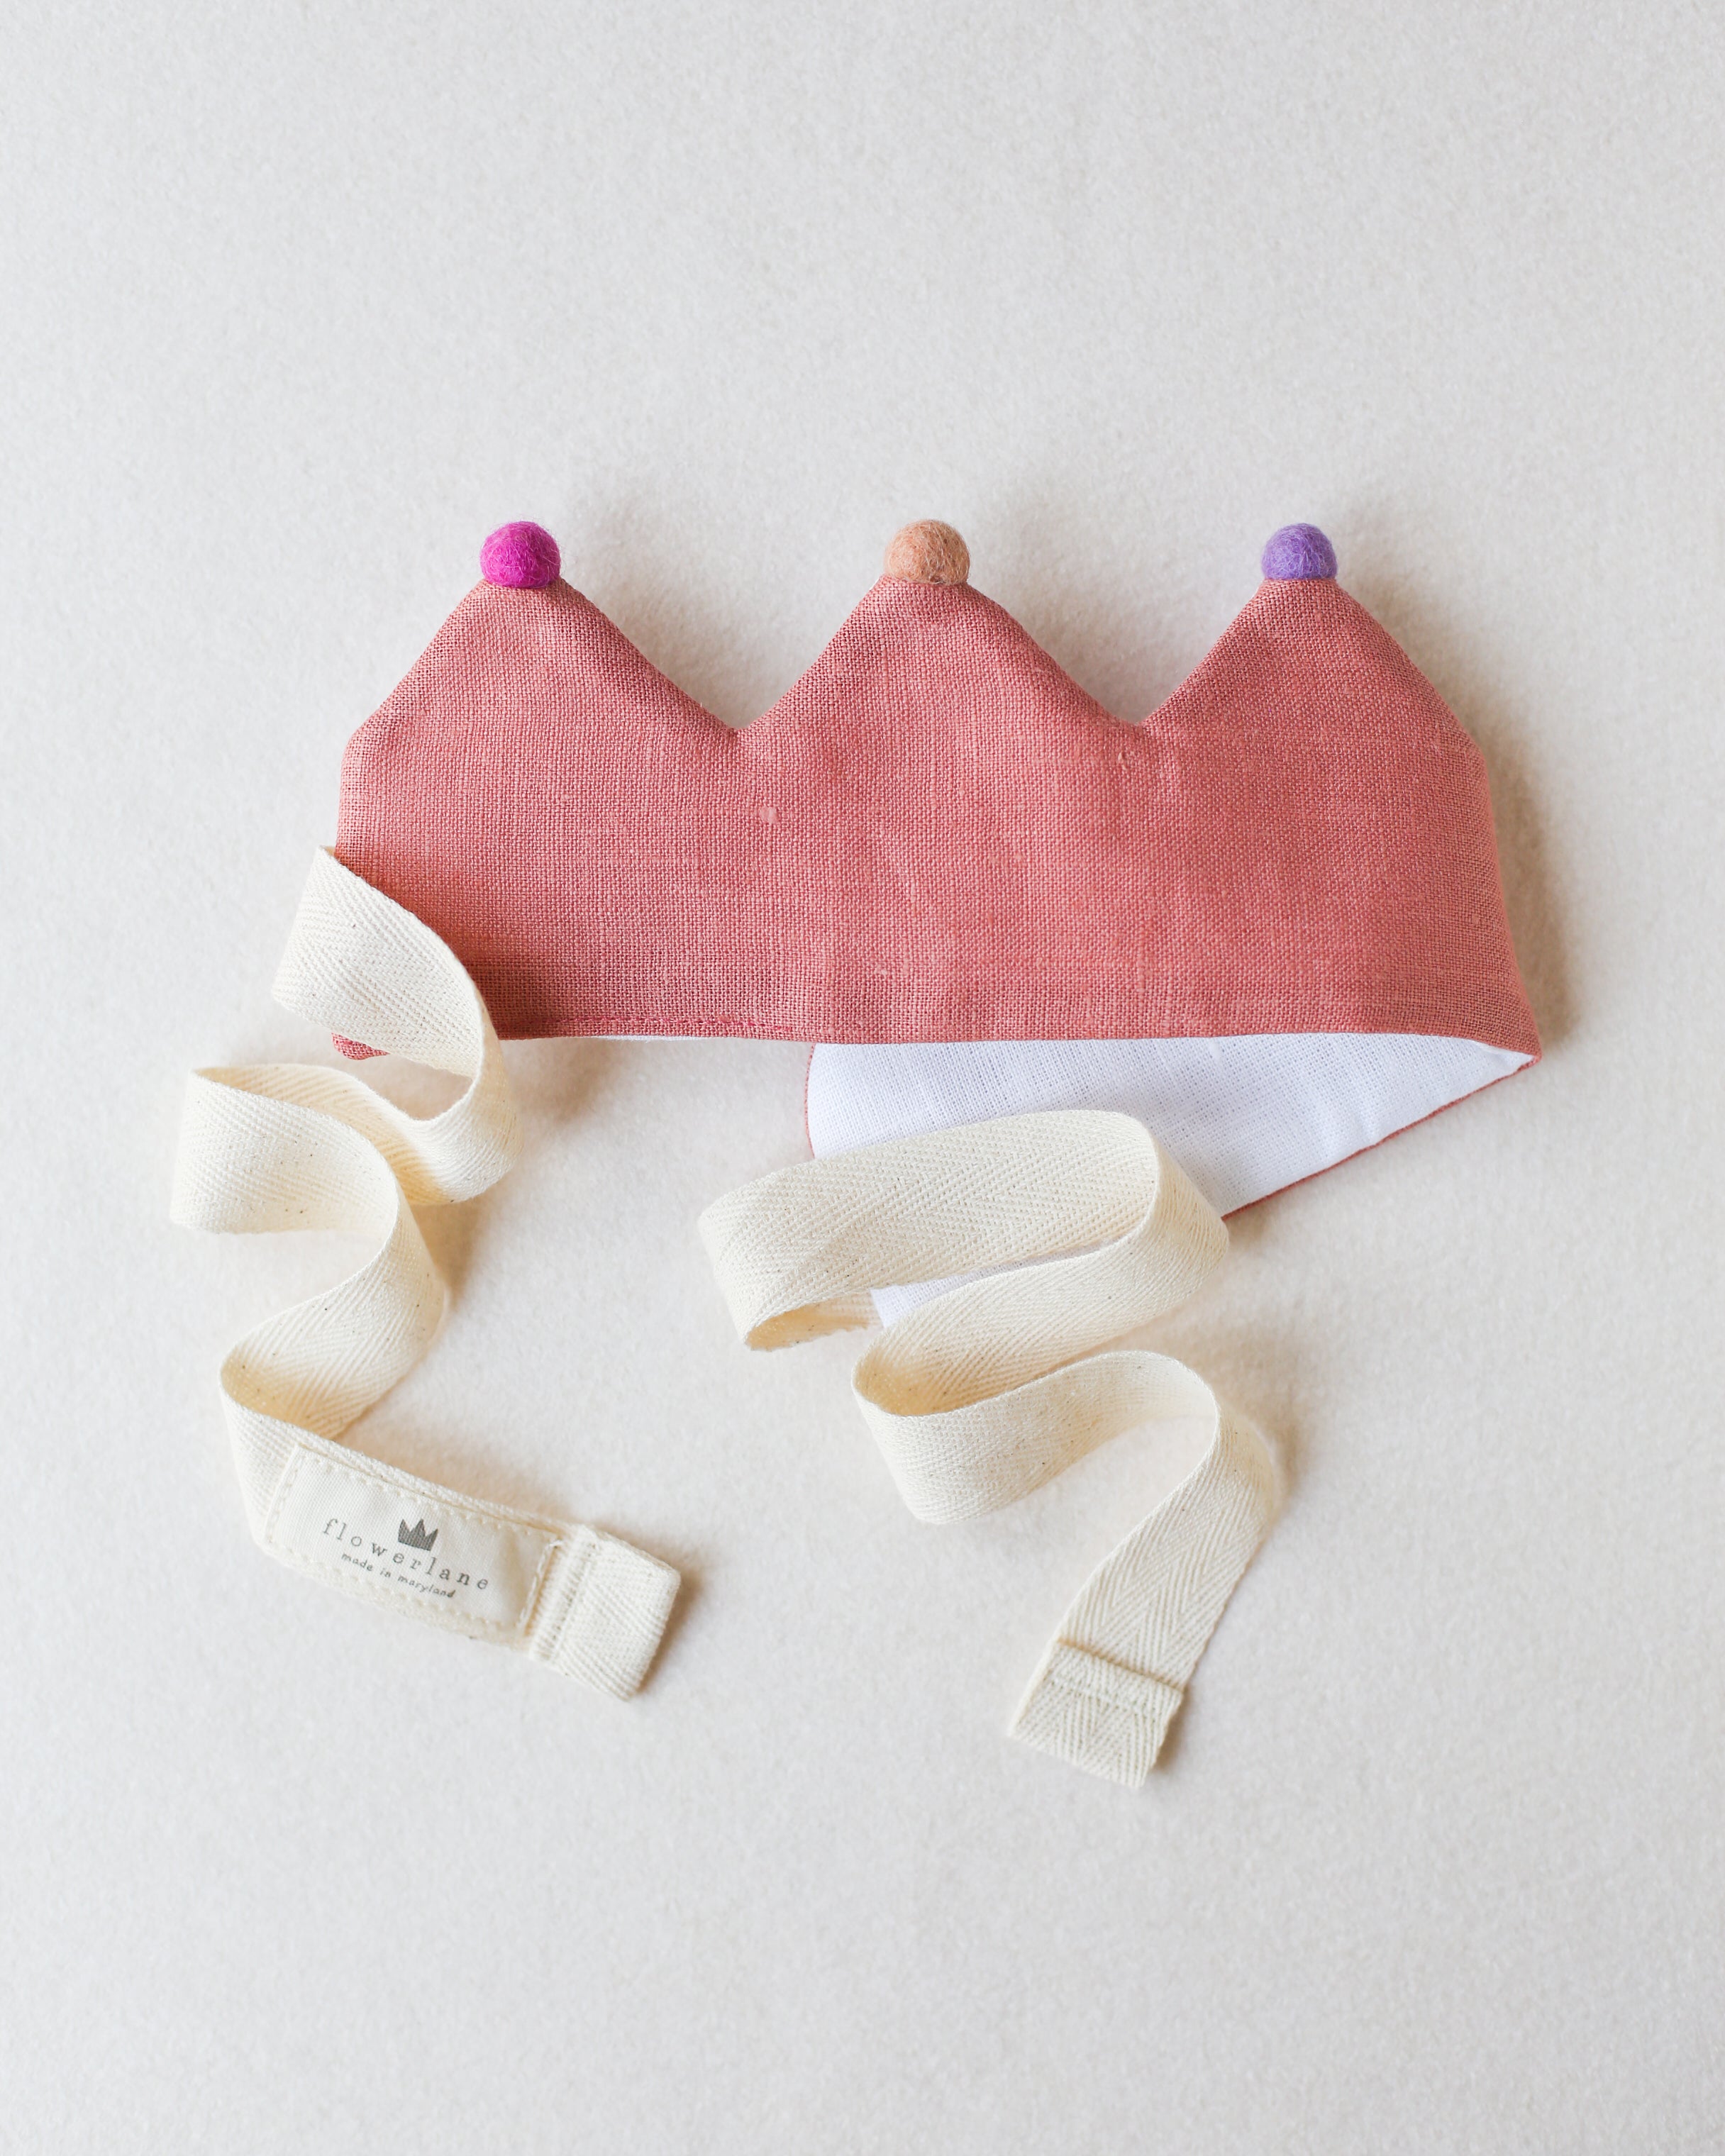 Colorful Mini Crowns : Birthday Party Crowns - Exit9 Gift Emporium